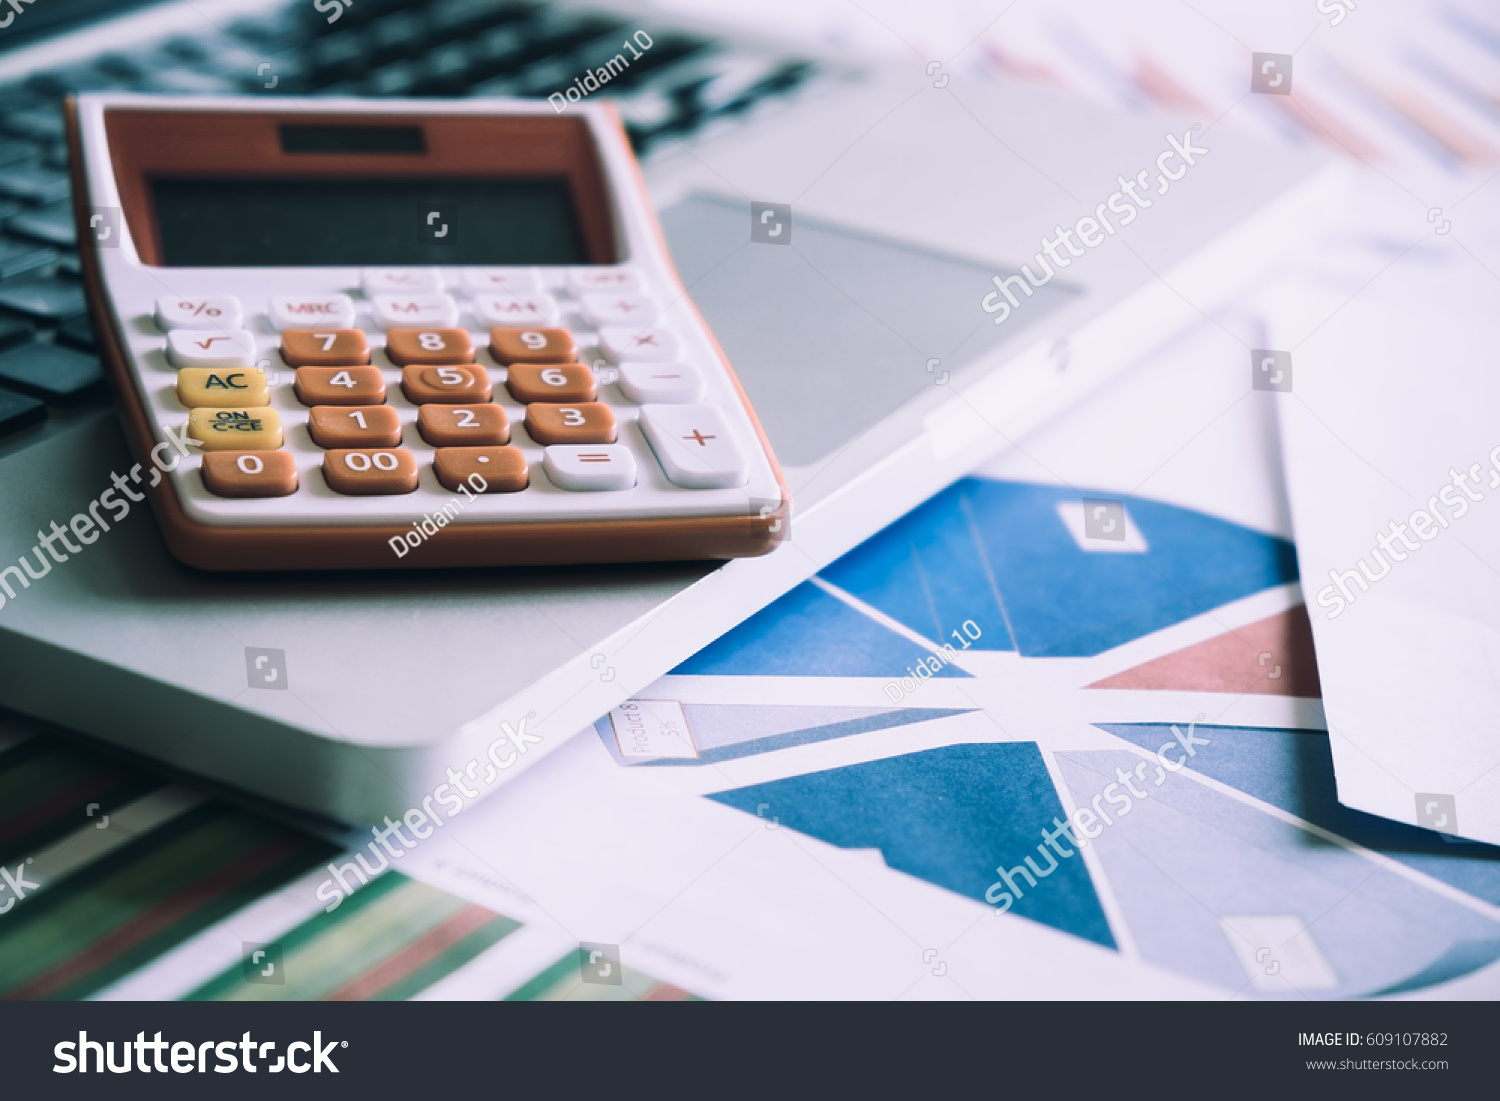 Calculator on a laptop keyboard with many charts and graphs. Reflection light and flare. Concept image of data gathering and statistical working.
 #609107882